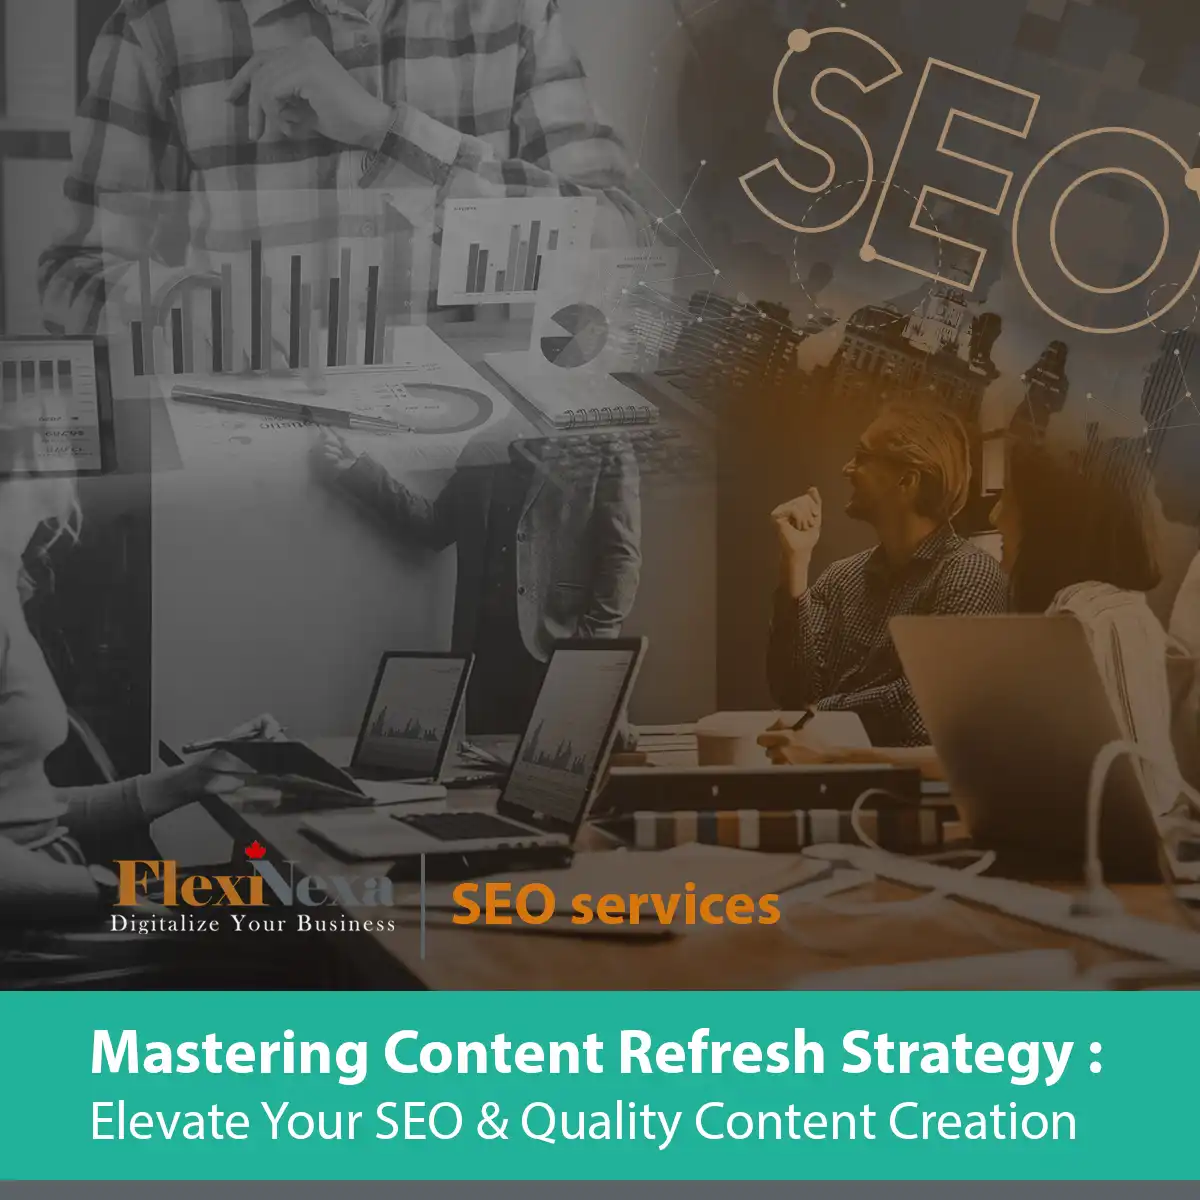 “Mastering Content Refresh Strategy: Elevate Your SEO and Quality Content Creation”